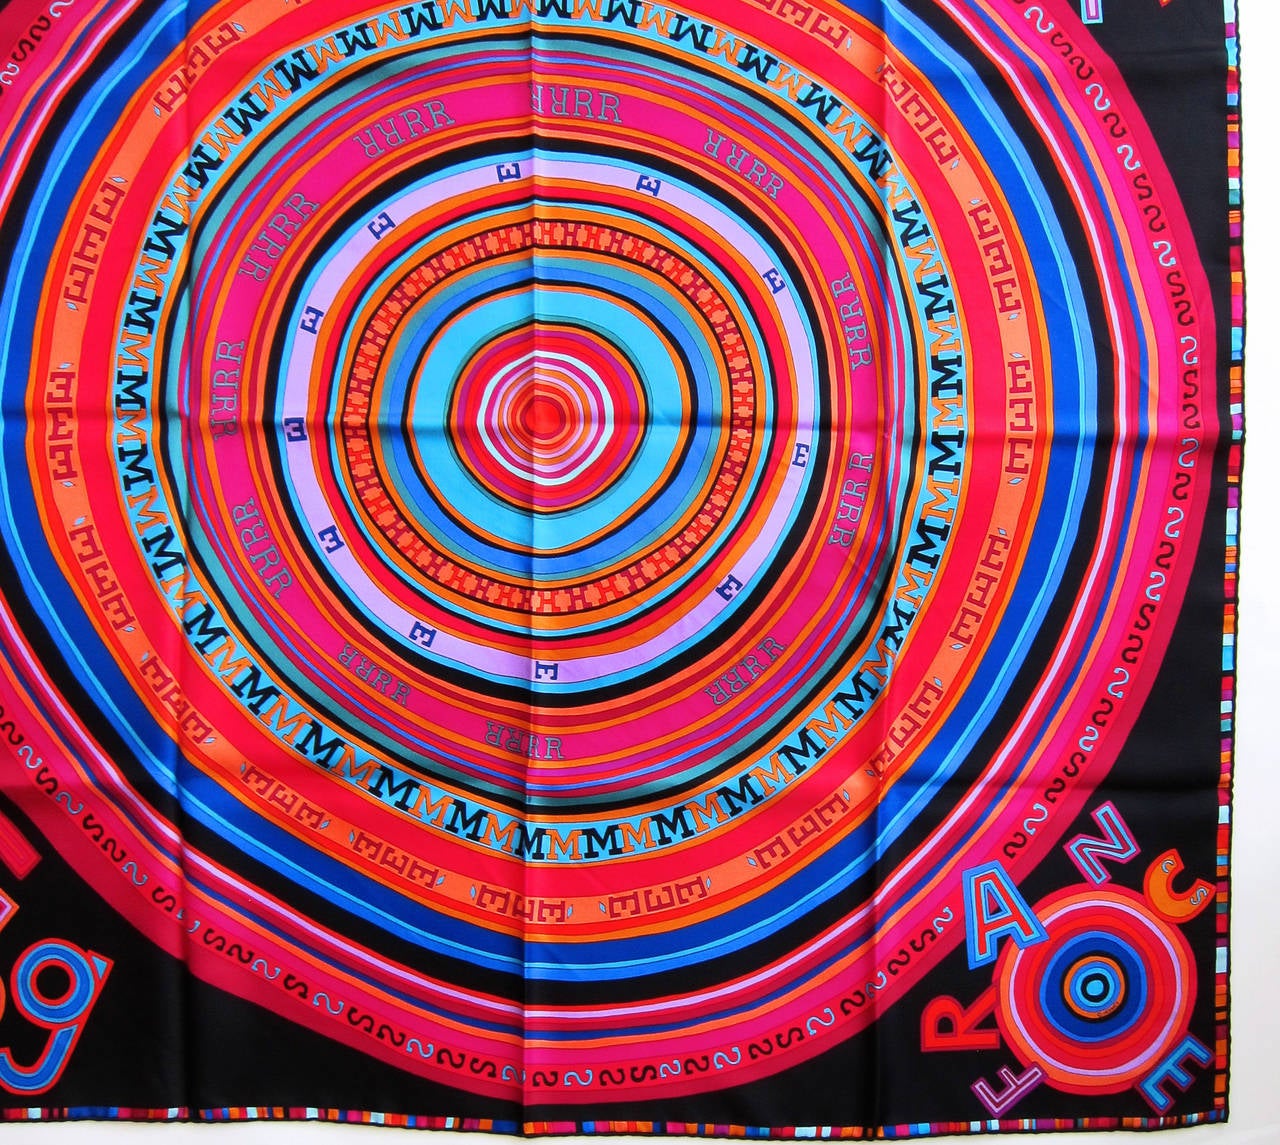 Hermes Black Multi-Color Tohu Bohu Silk Carre Scarf 90cm Grail

Famous Tohu Bohu design by artist Claudia Stuhlhofer-Mayr
References Hermes Paris flagship at 24 Faubourg
Fabulous and lively grail silk scarf 
Spelling out Hermes in vibrant